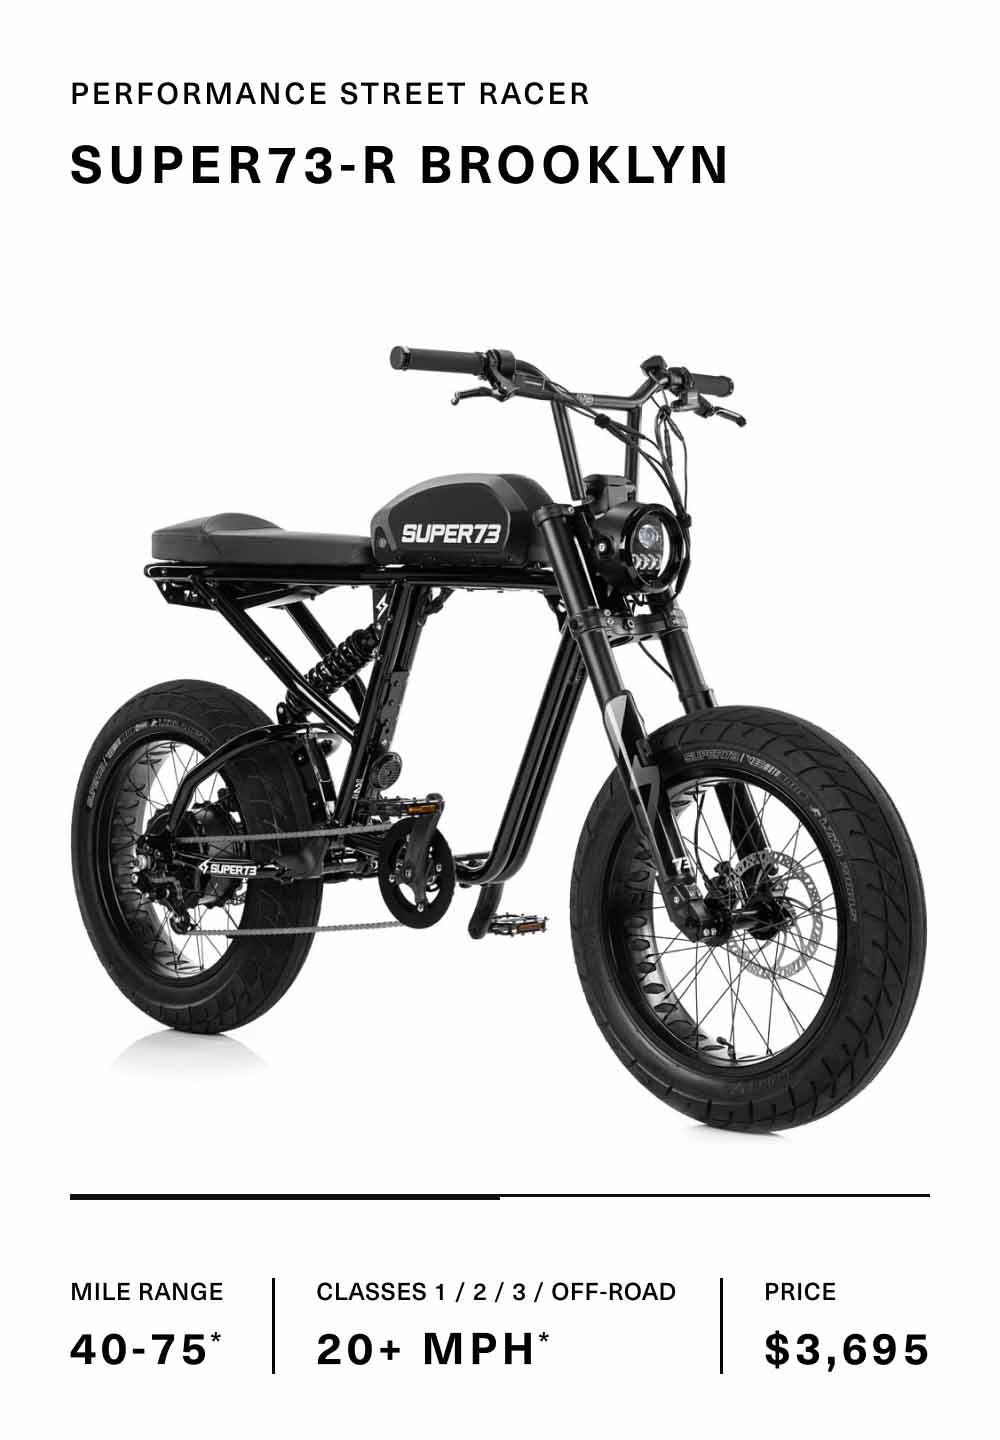 The SUPER73-R Brooklyn Obsidian, Performance Street Racer. Mile Range 40-75*. Classes 1/2/3/Off-Road 20+ MPH. Price $3,695.00.